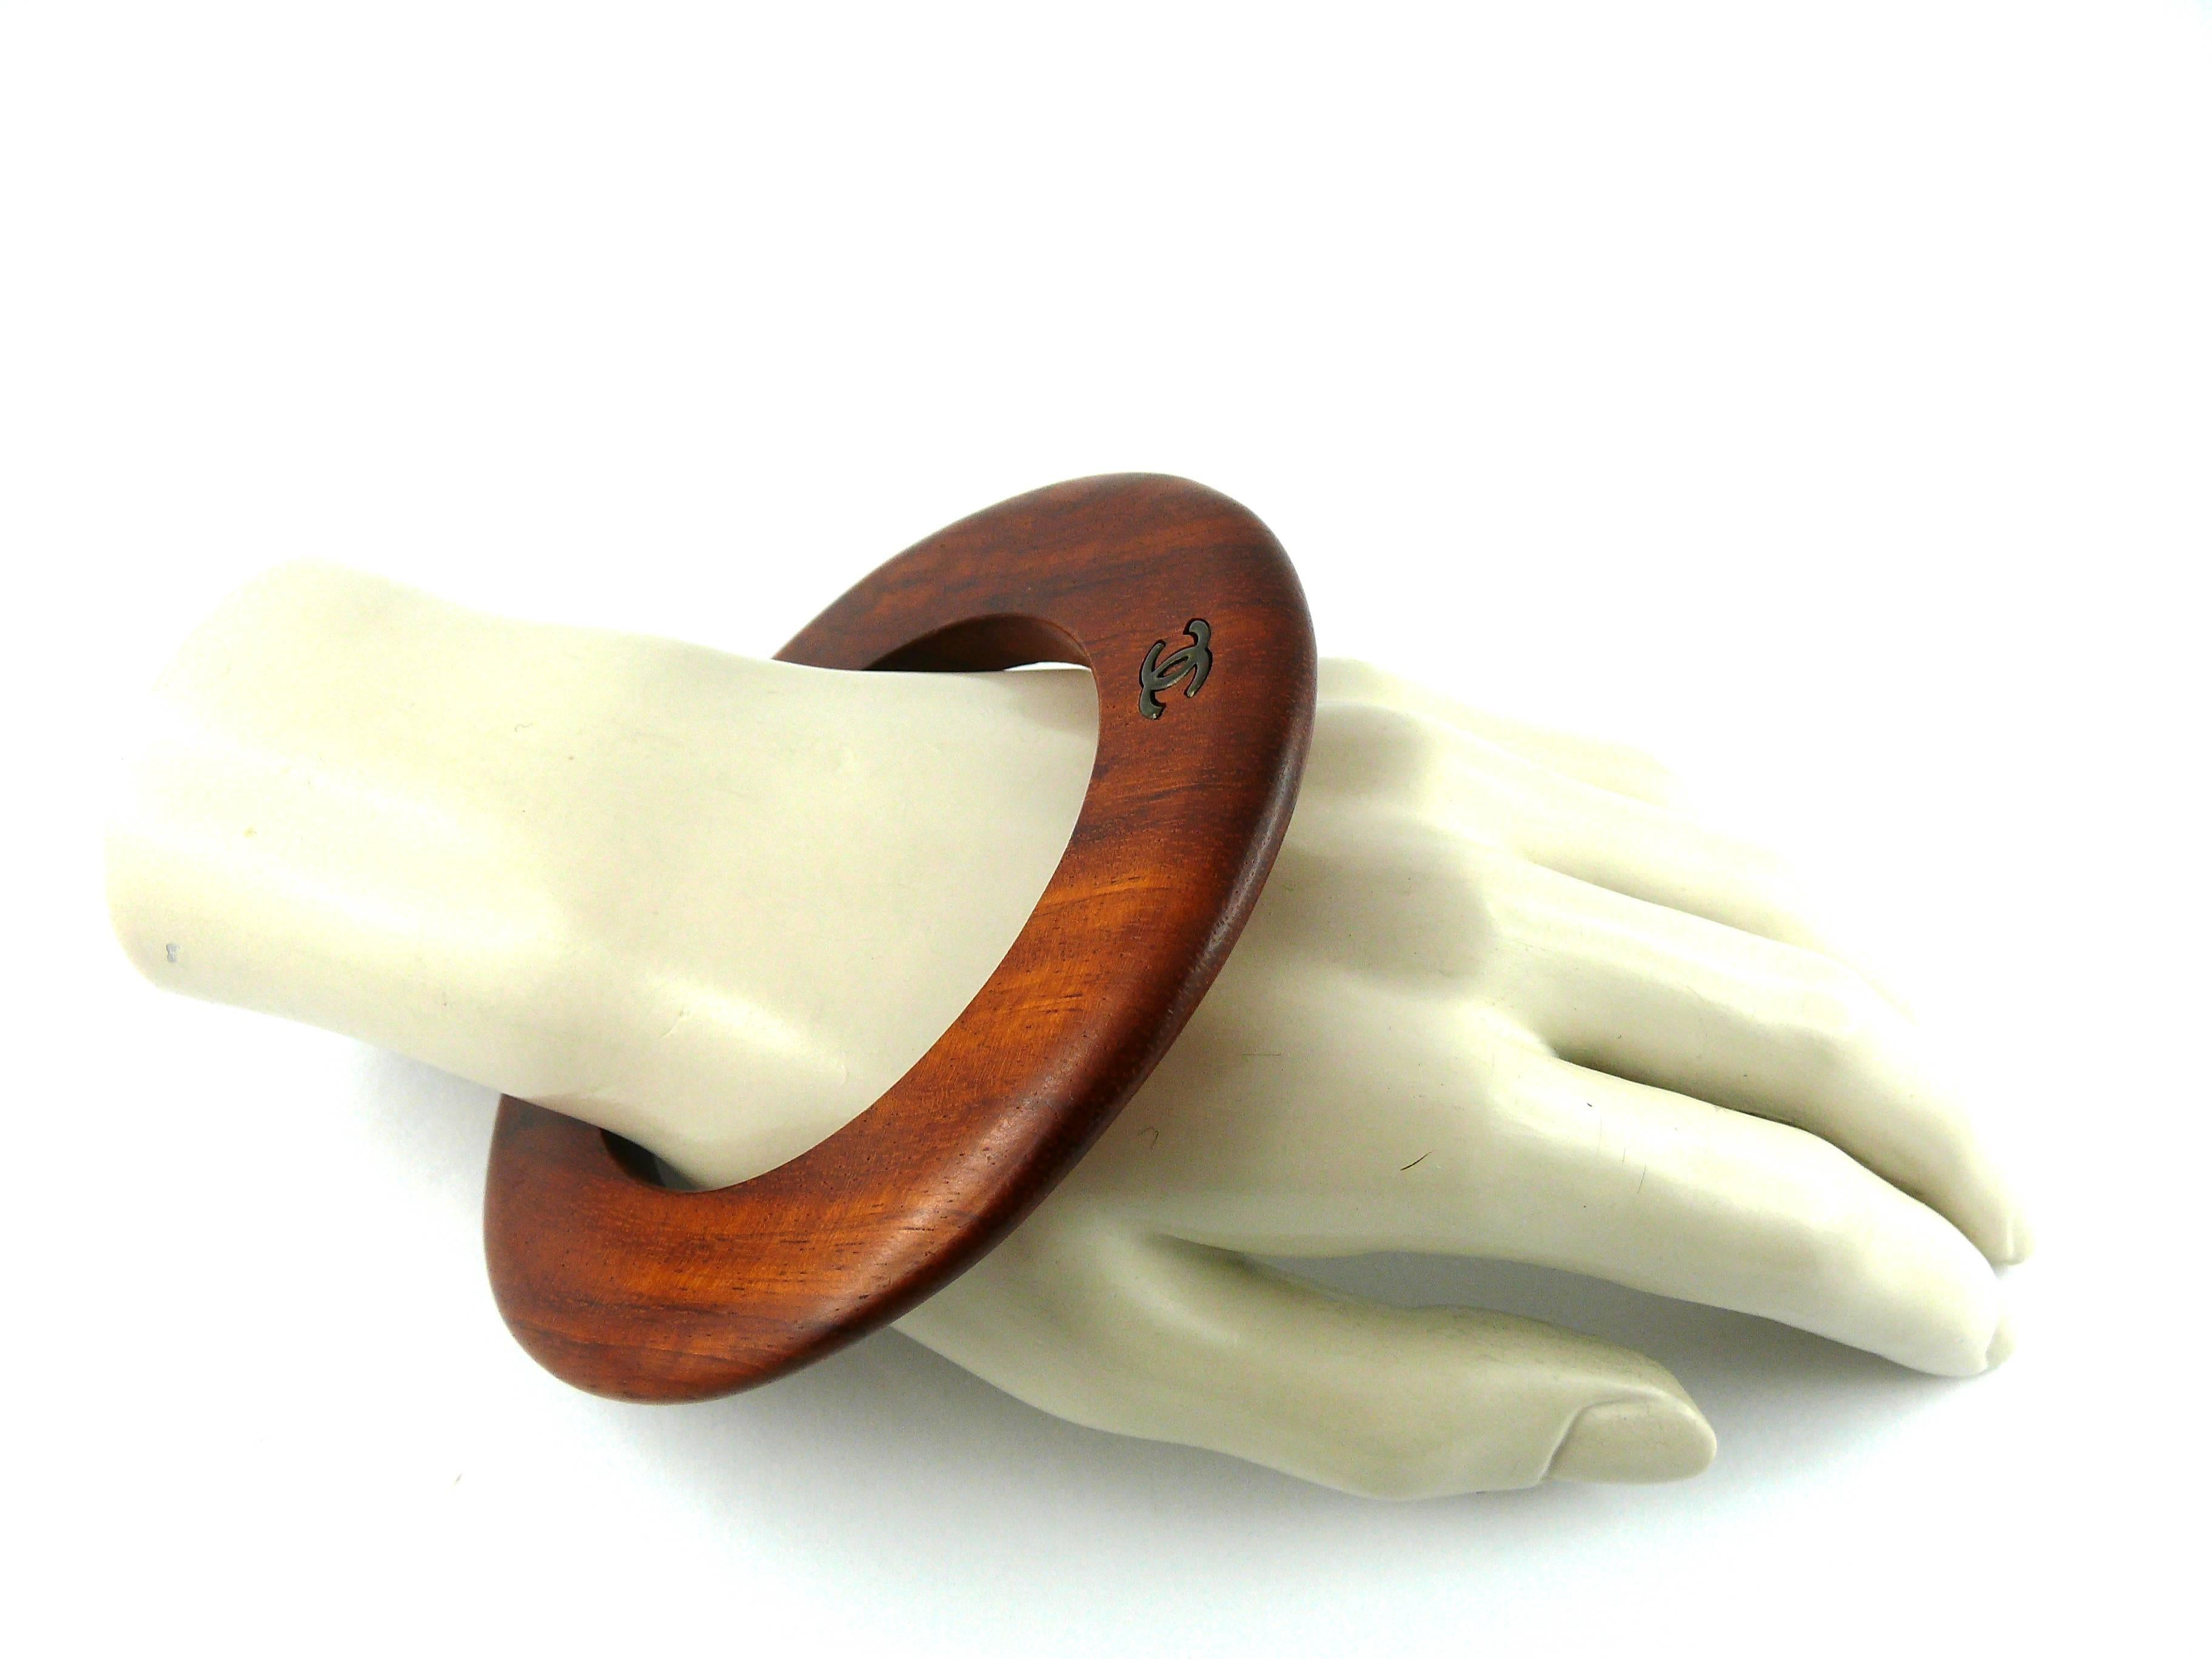 CHANEL vintage exotic wood bangle bracelet featuring a bronze patina double C logo.

Fall 1996 Collection.

This bangle has an elegant modern shape and a very soft and smooth texture from the oustide. 
Looks great with many outfits, for wearing